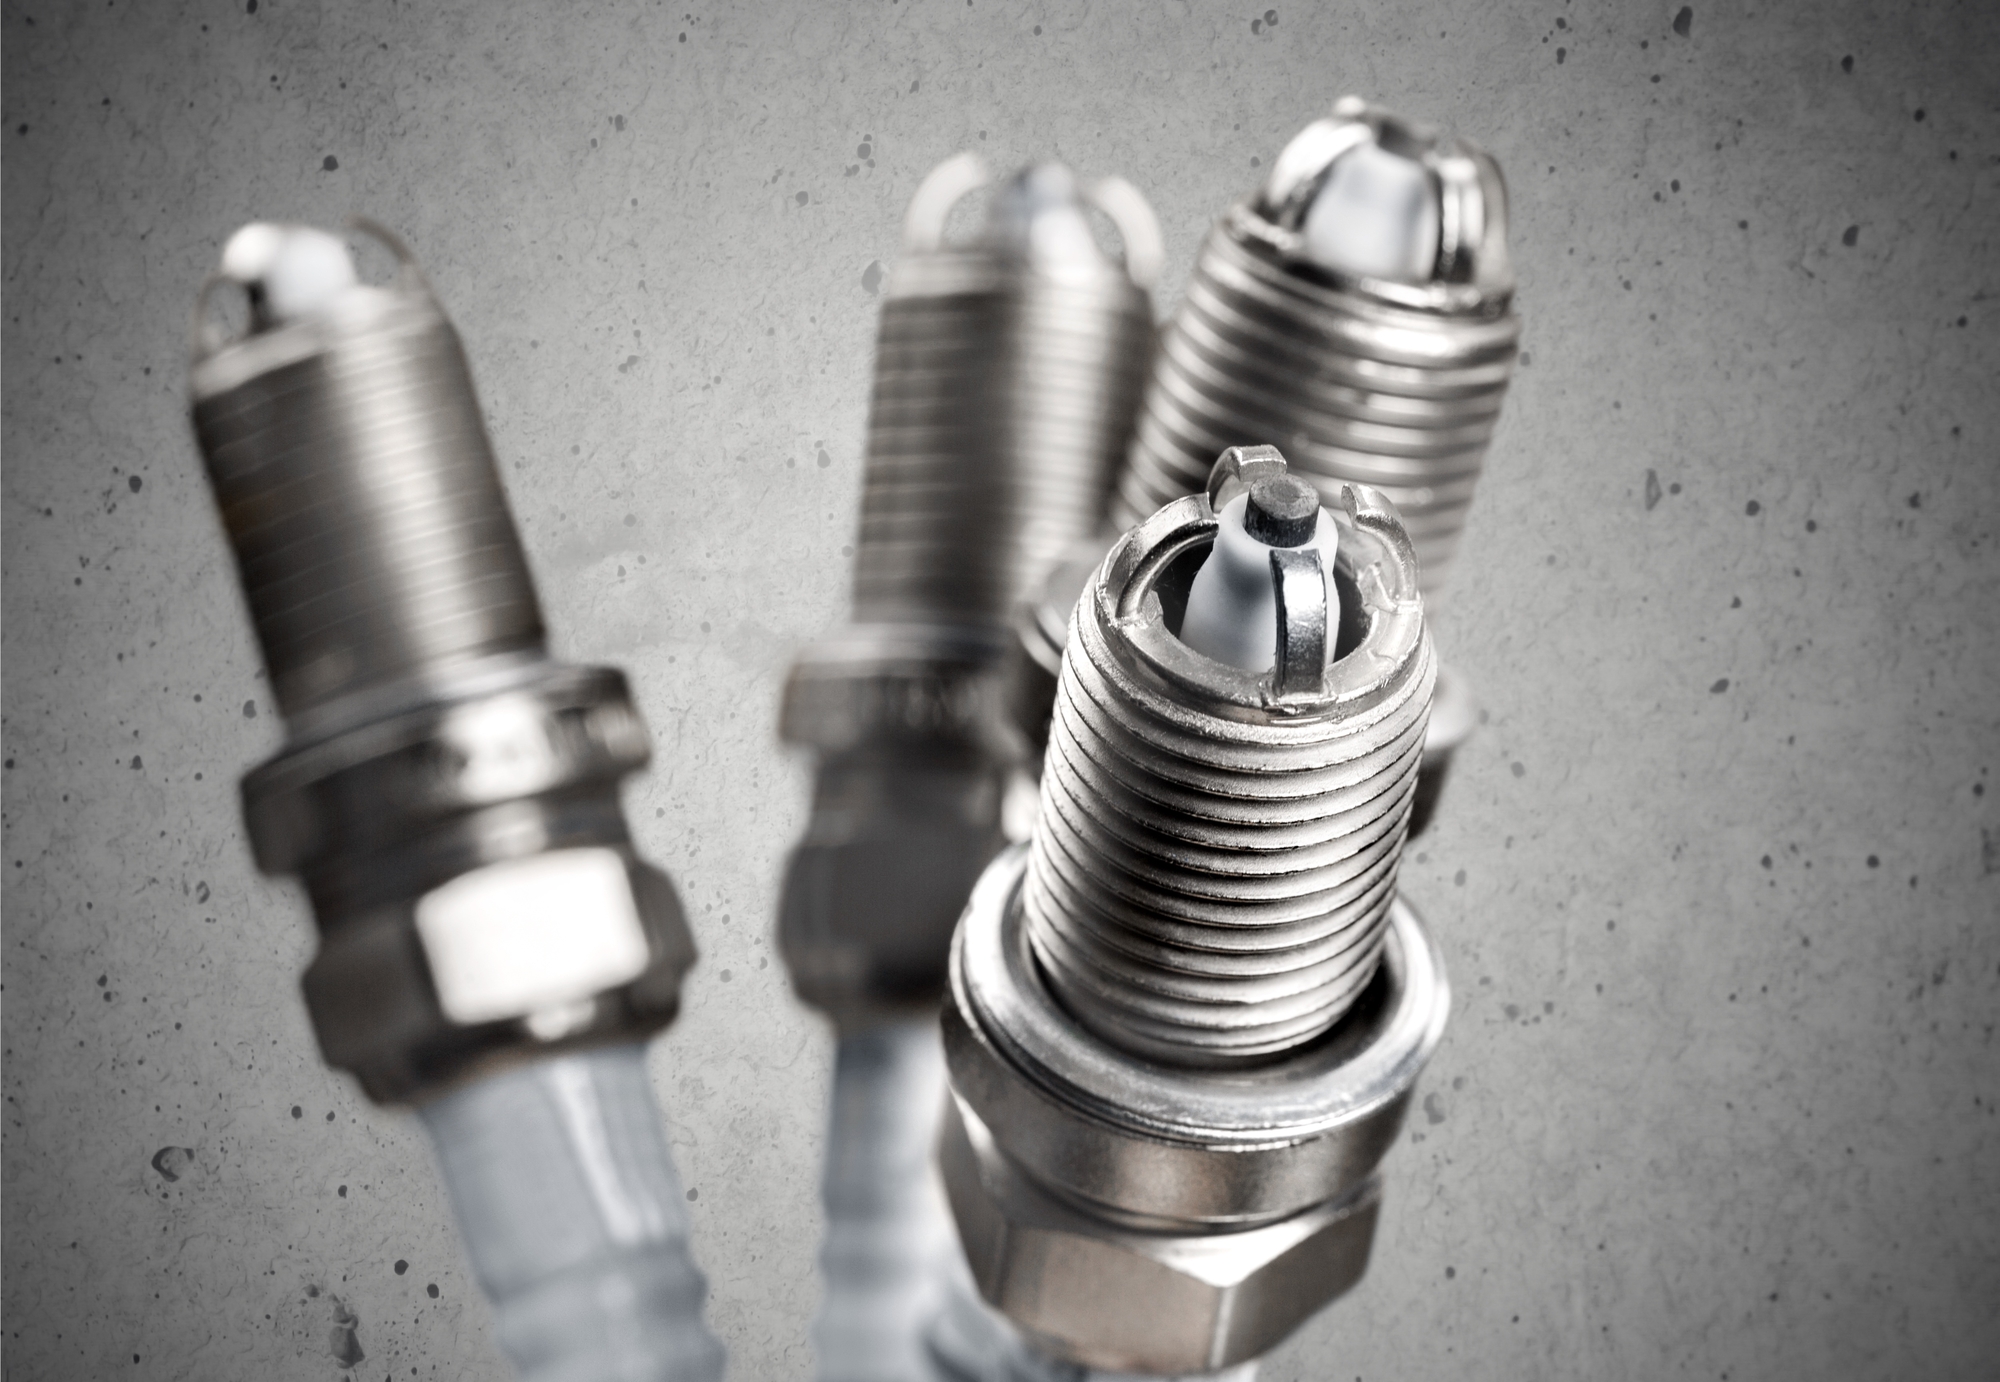 iridium-spark-plugs-pros-cons-and-our-expert-s-opinion-my-car